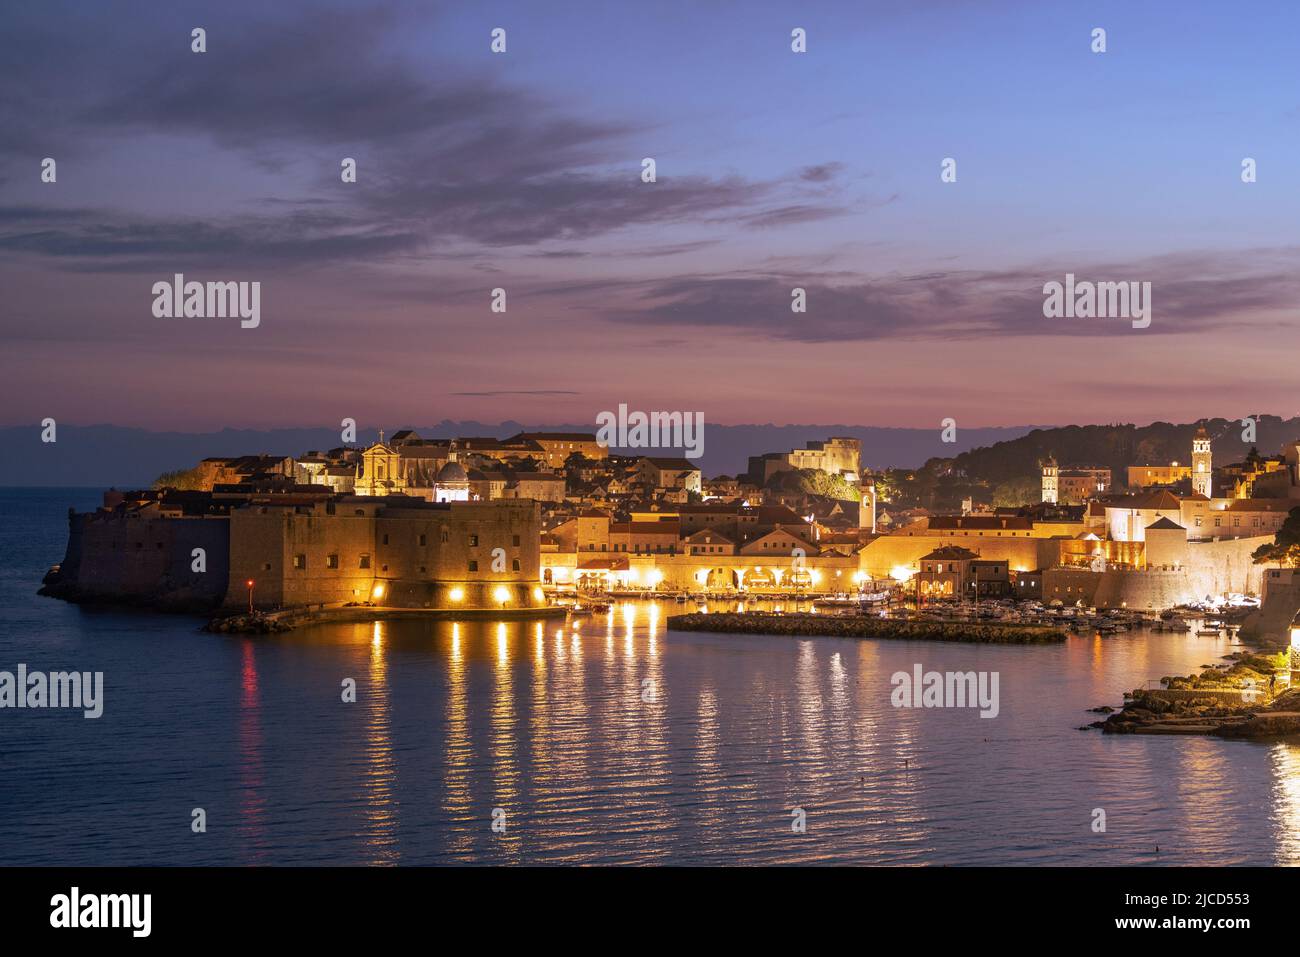 Sunset View of Old Town, Dubrovnik, Croatia Stock Photo